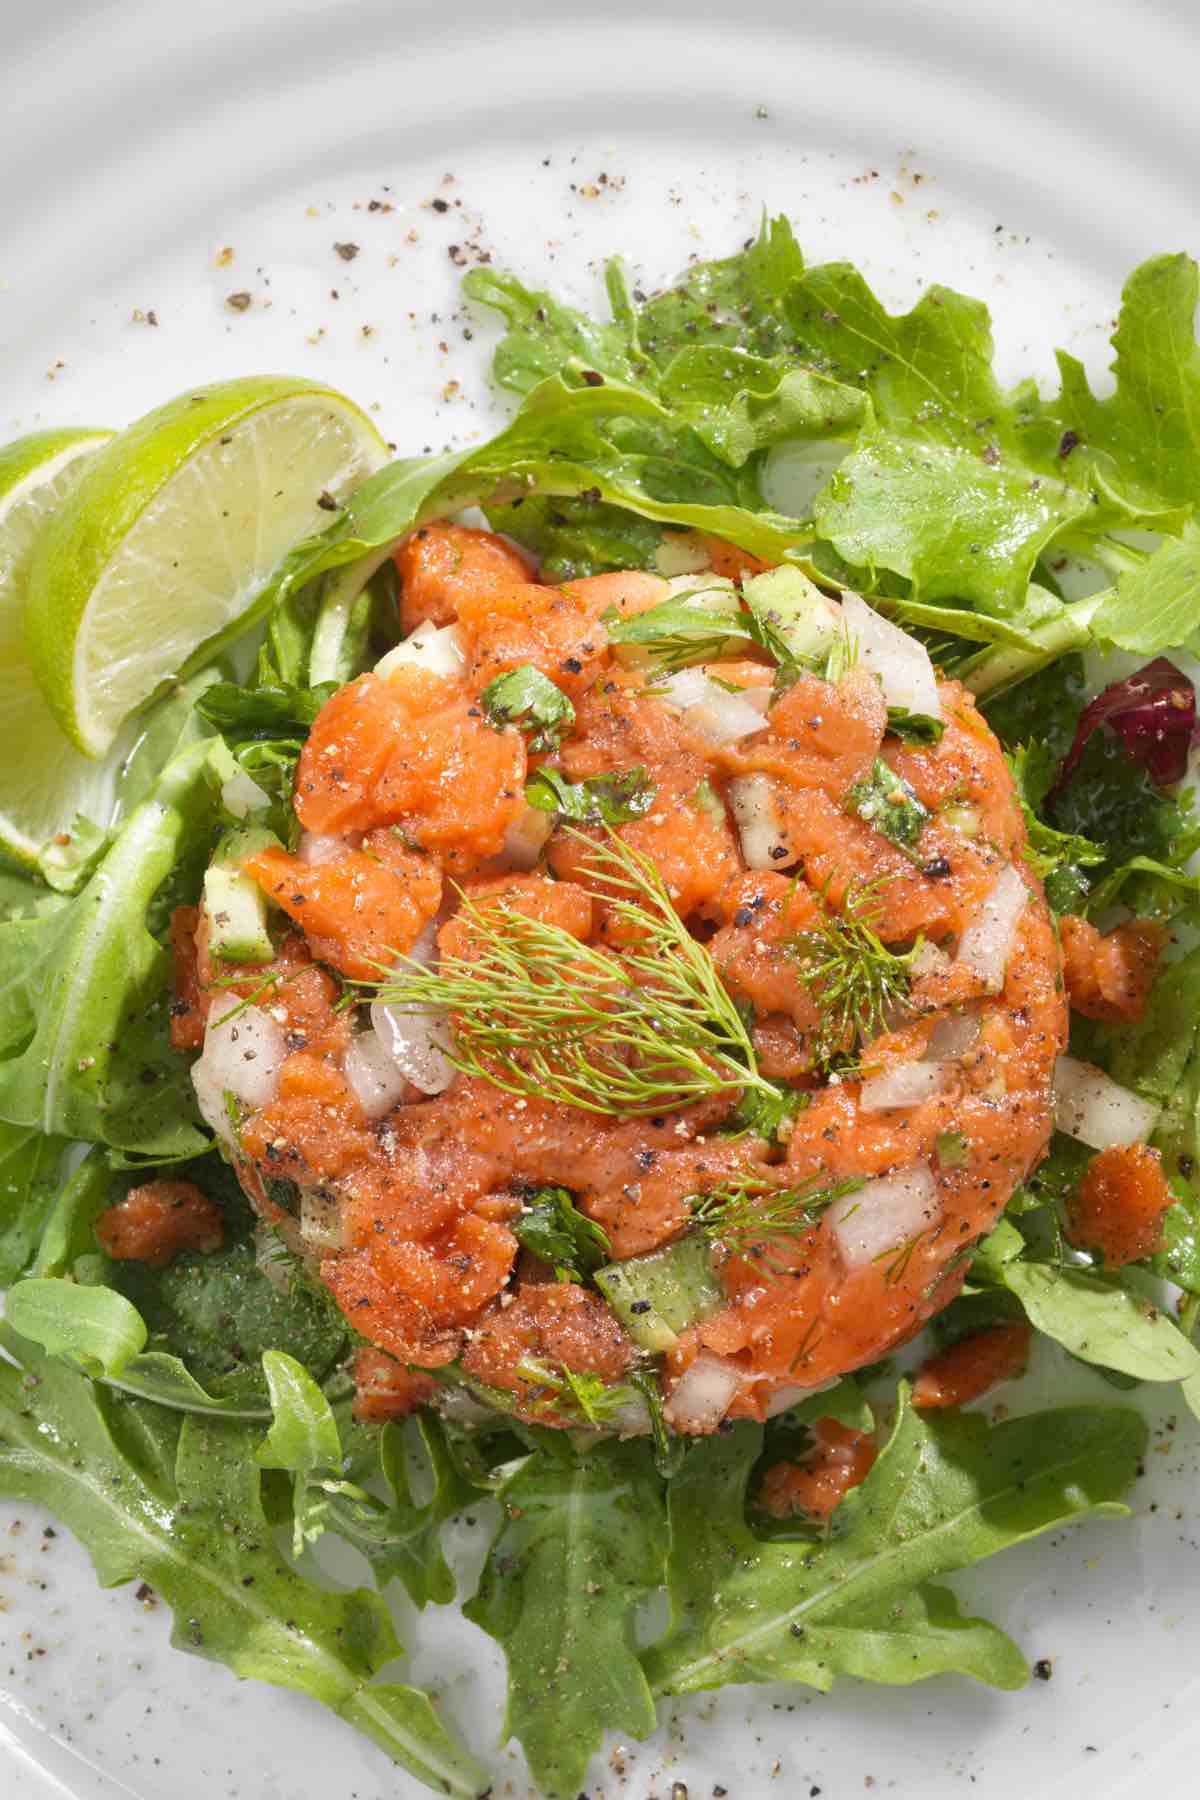 You’ll hardly find a more elegant appetizer than Salmon Tartare. Despite its fancy name, this dish is deceptively easy to prepare with just a few simple ingredients. Using sashimi-grade salmon and classic seasonings, you’ll have a sophisticated platter that’s sure to impress.